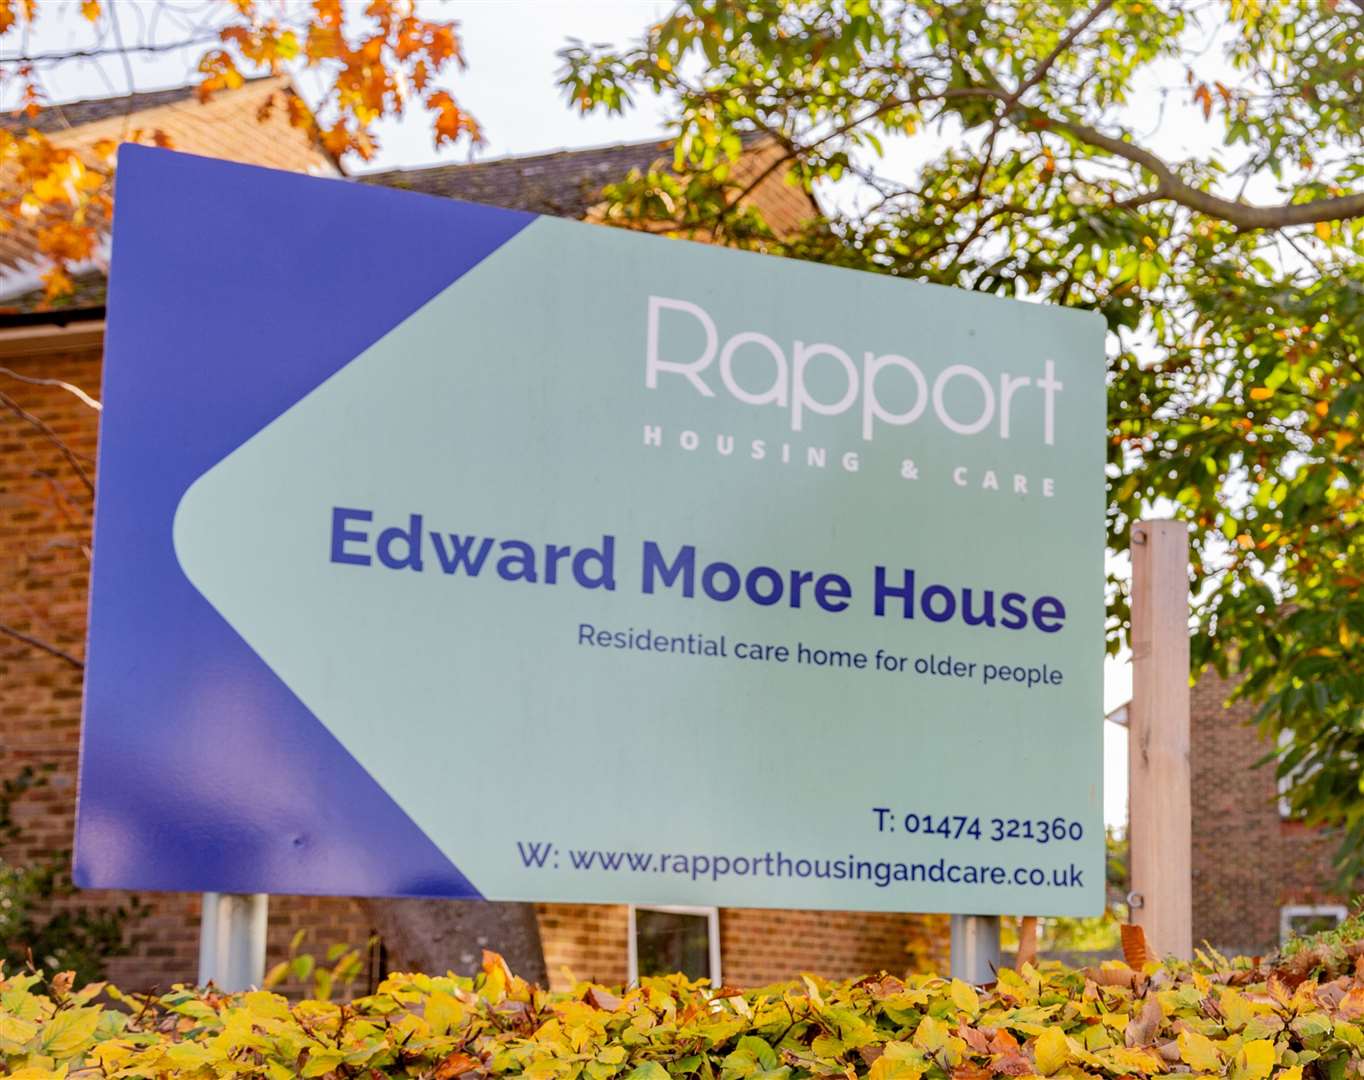 Edward Moore House closed in 2022